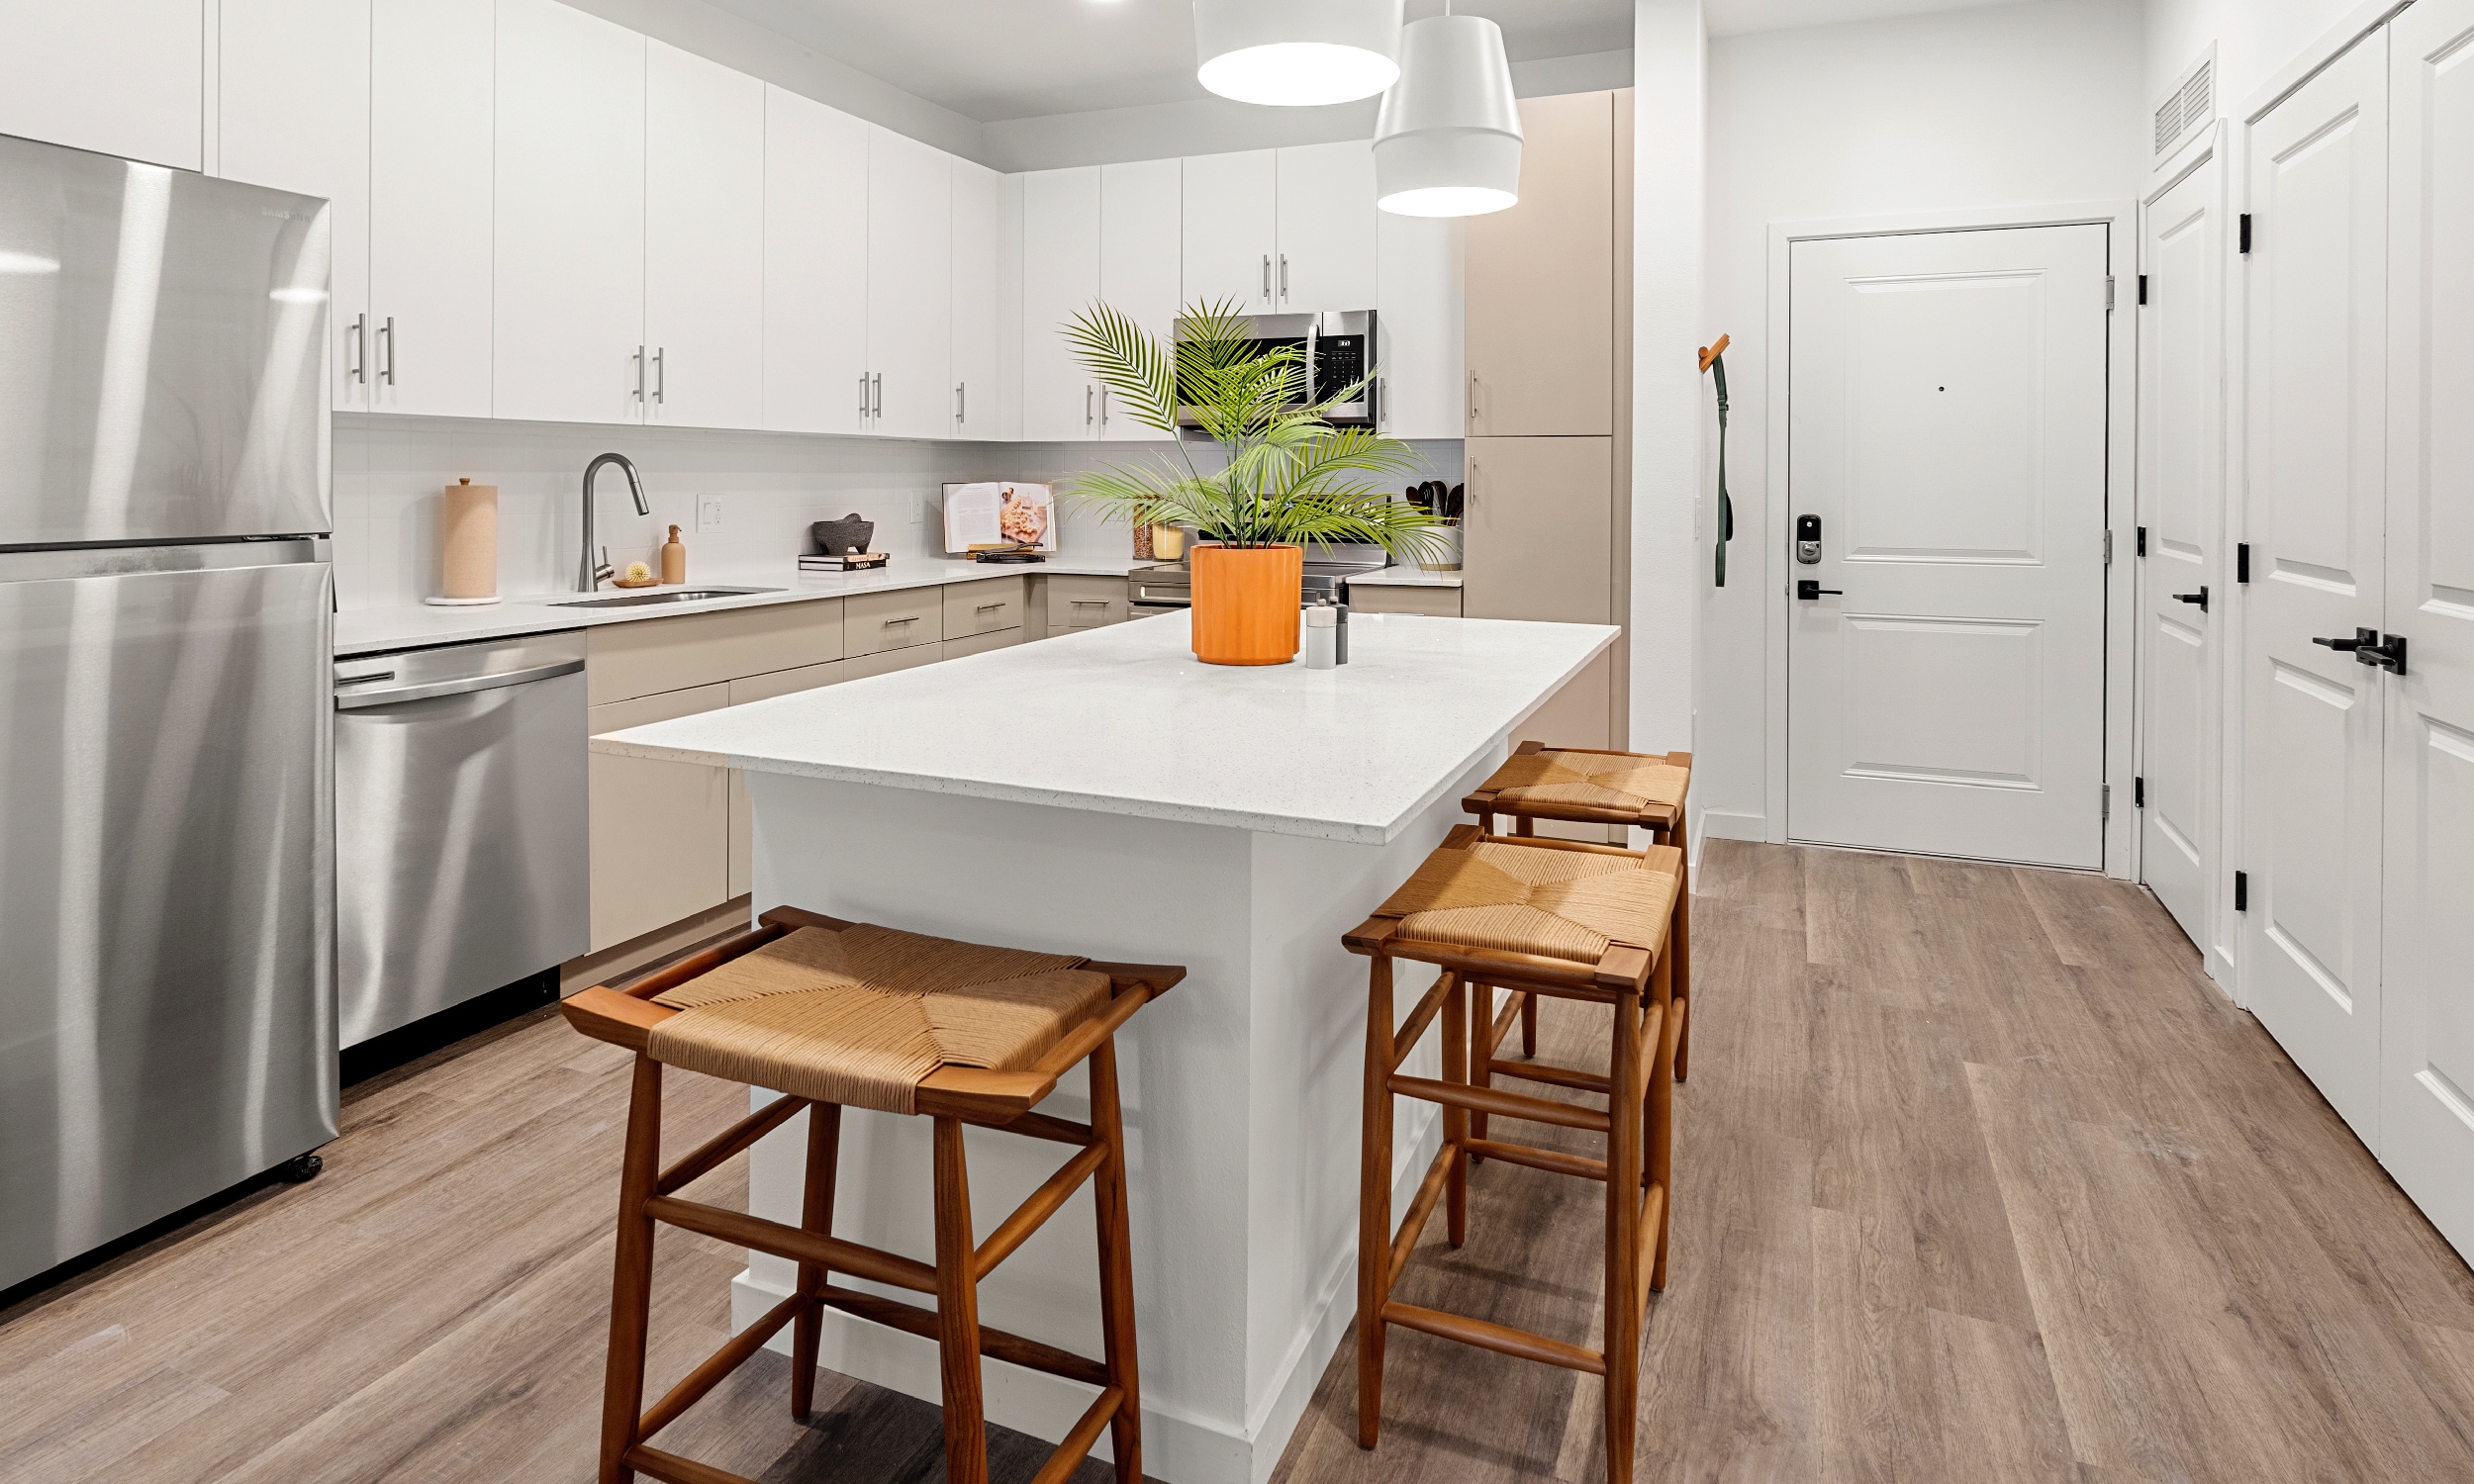 A new apartment kitchen with stainless appliances, white counters and a center island with stools